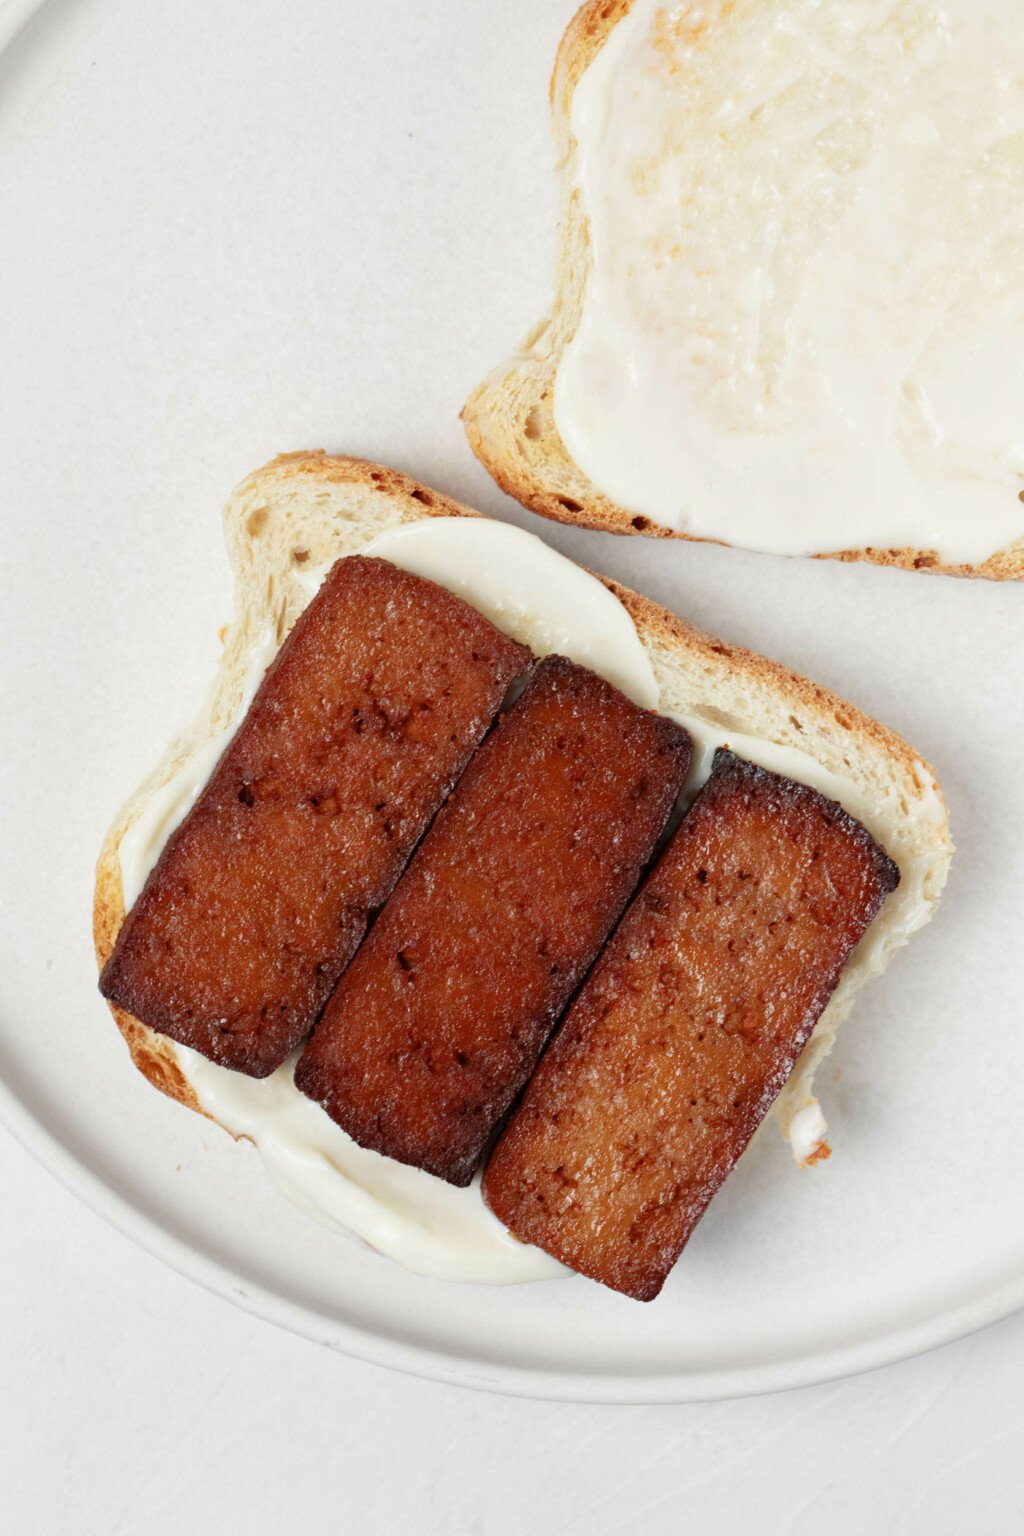 A slice of bread is topped with mayonnaise and dark brown slices of smoky tofu.